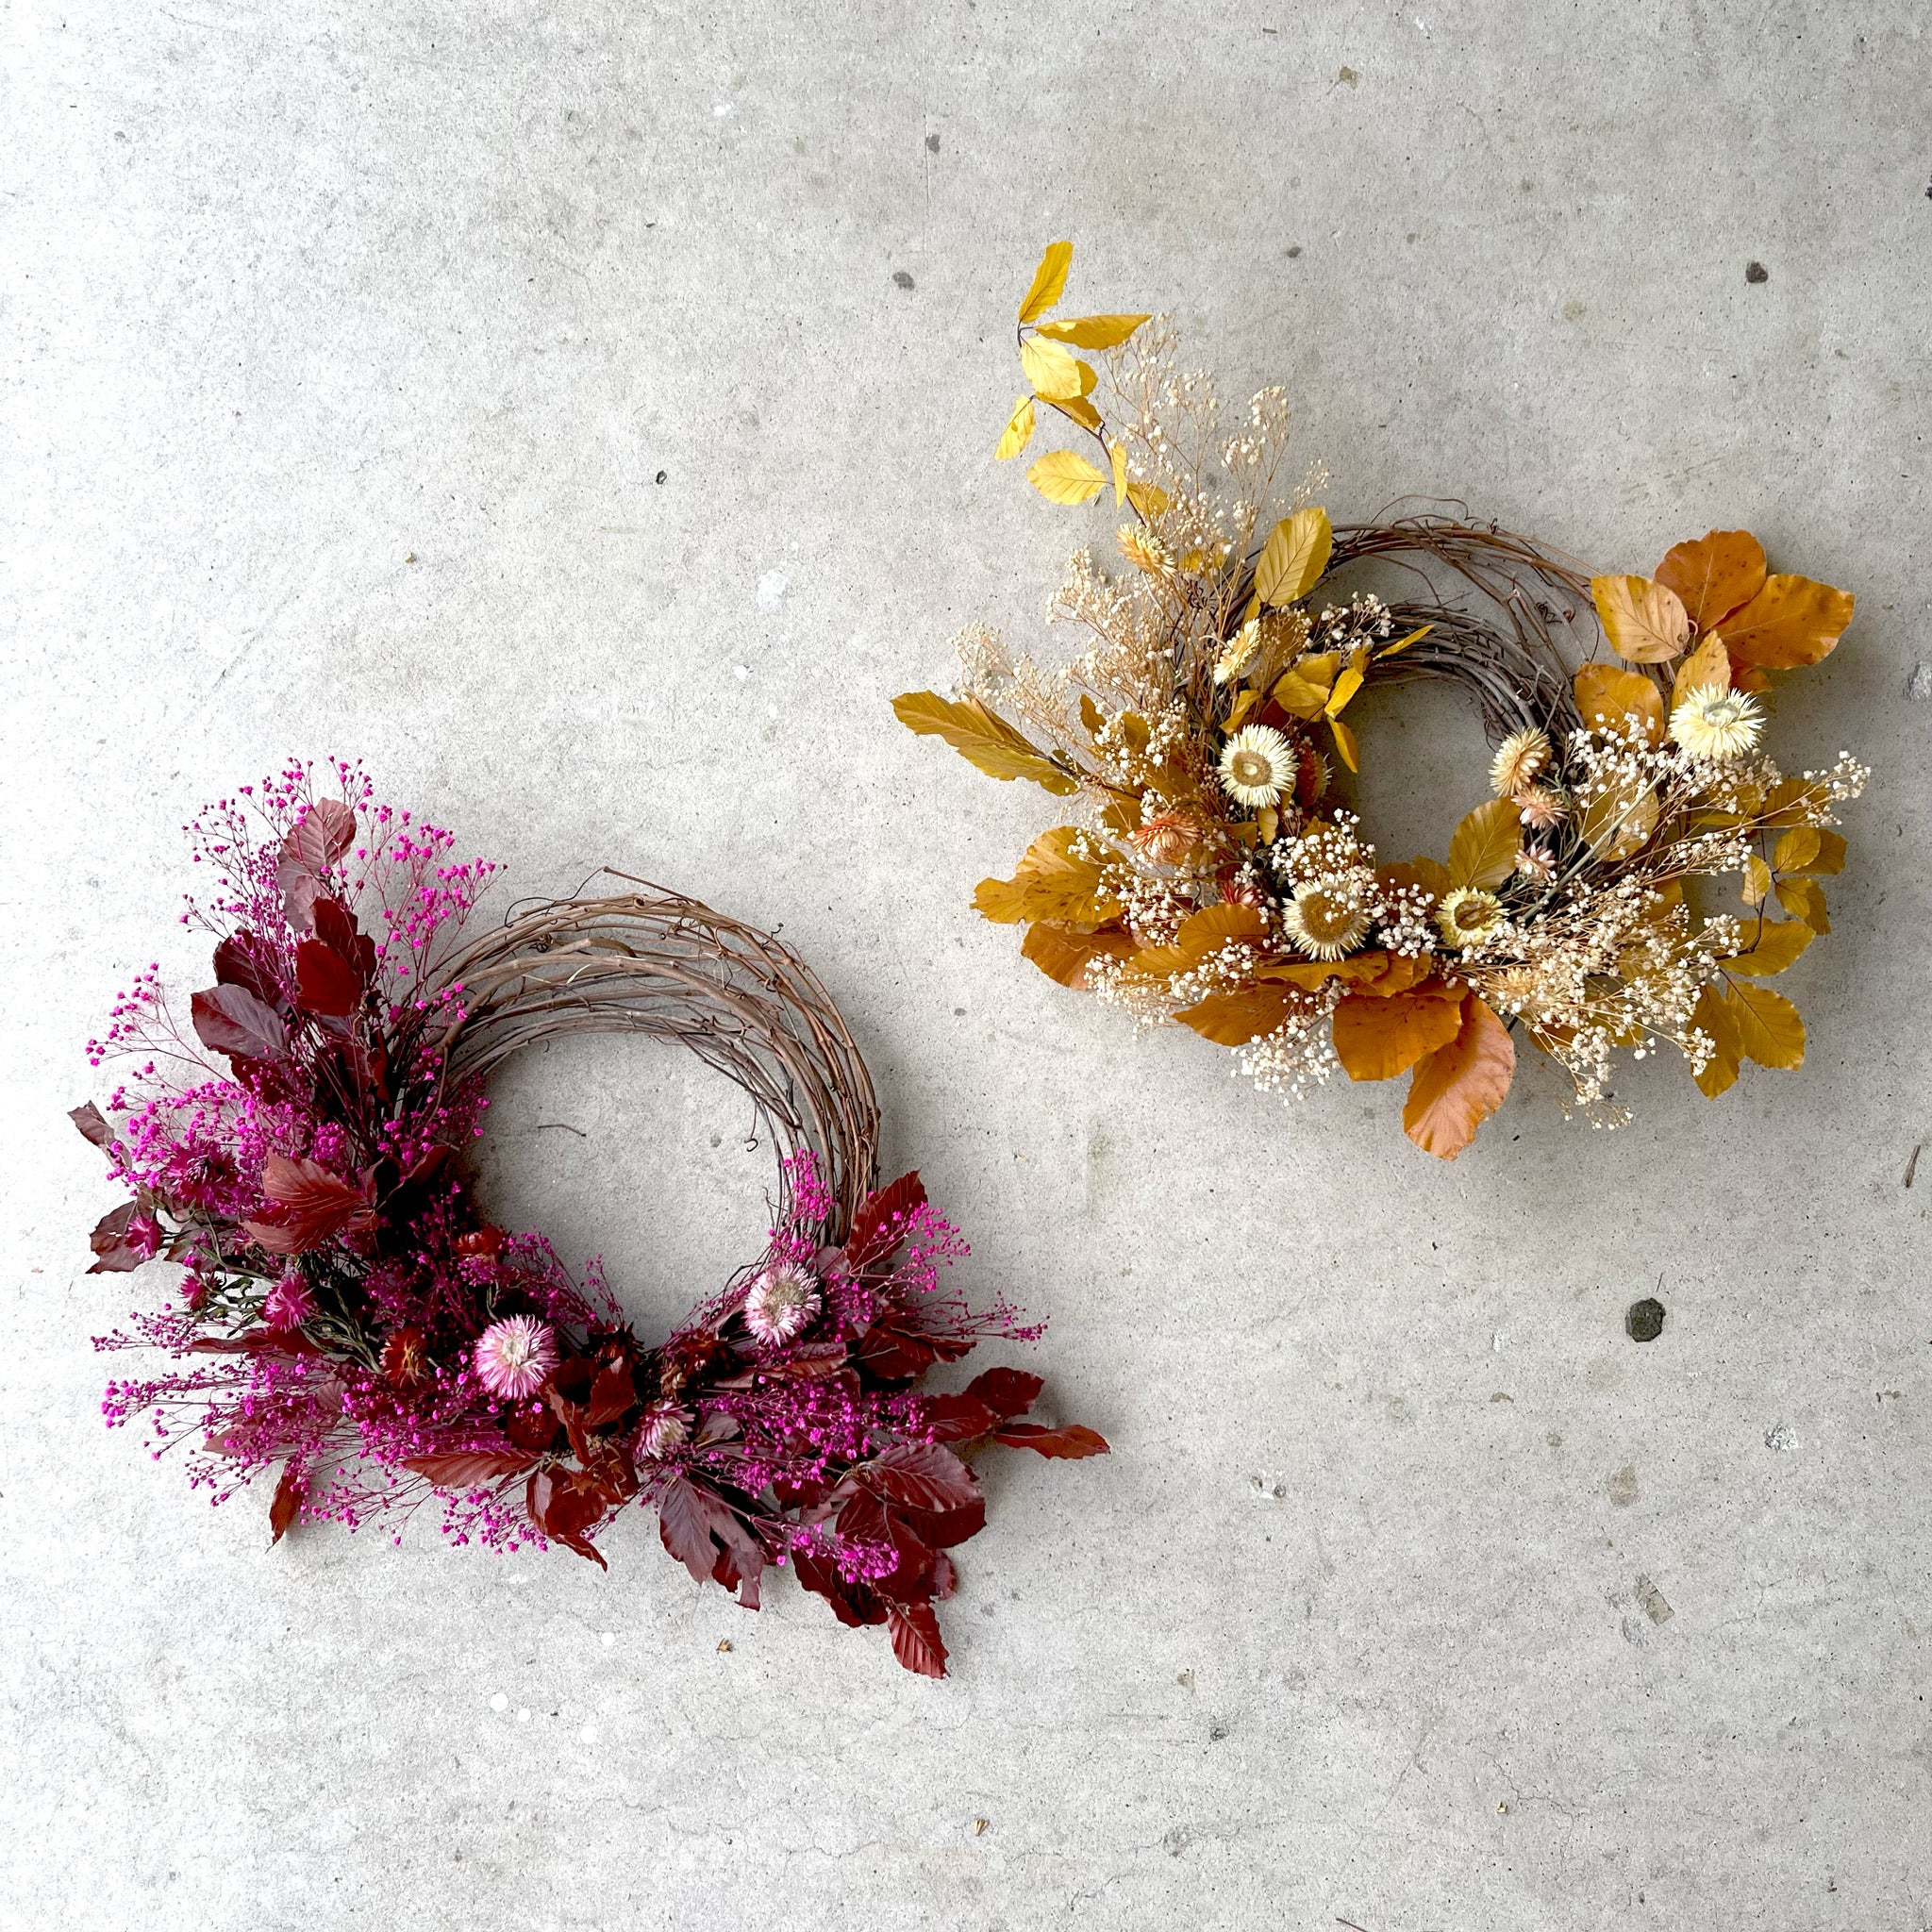 Biodegradable Floral Wreath – Native Poppy